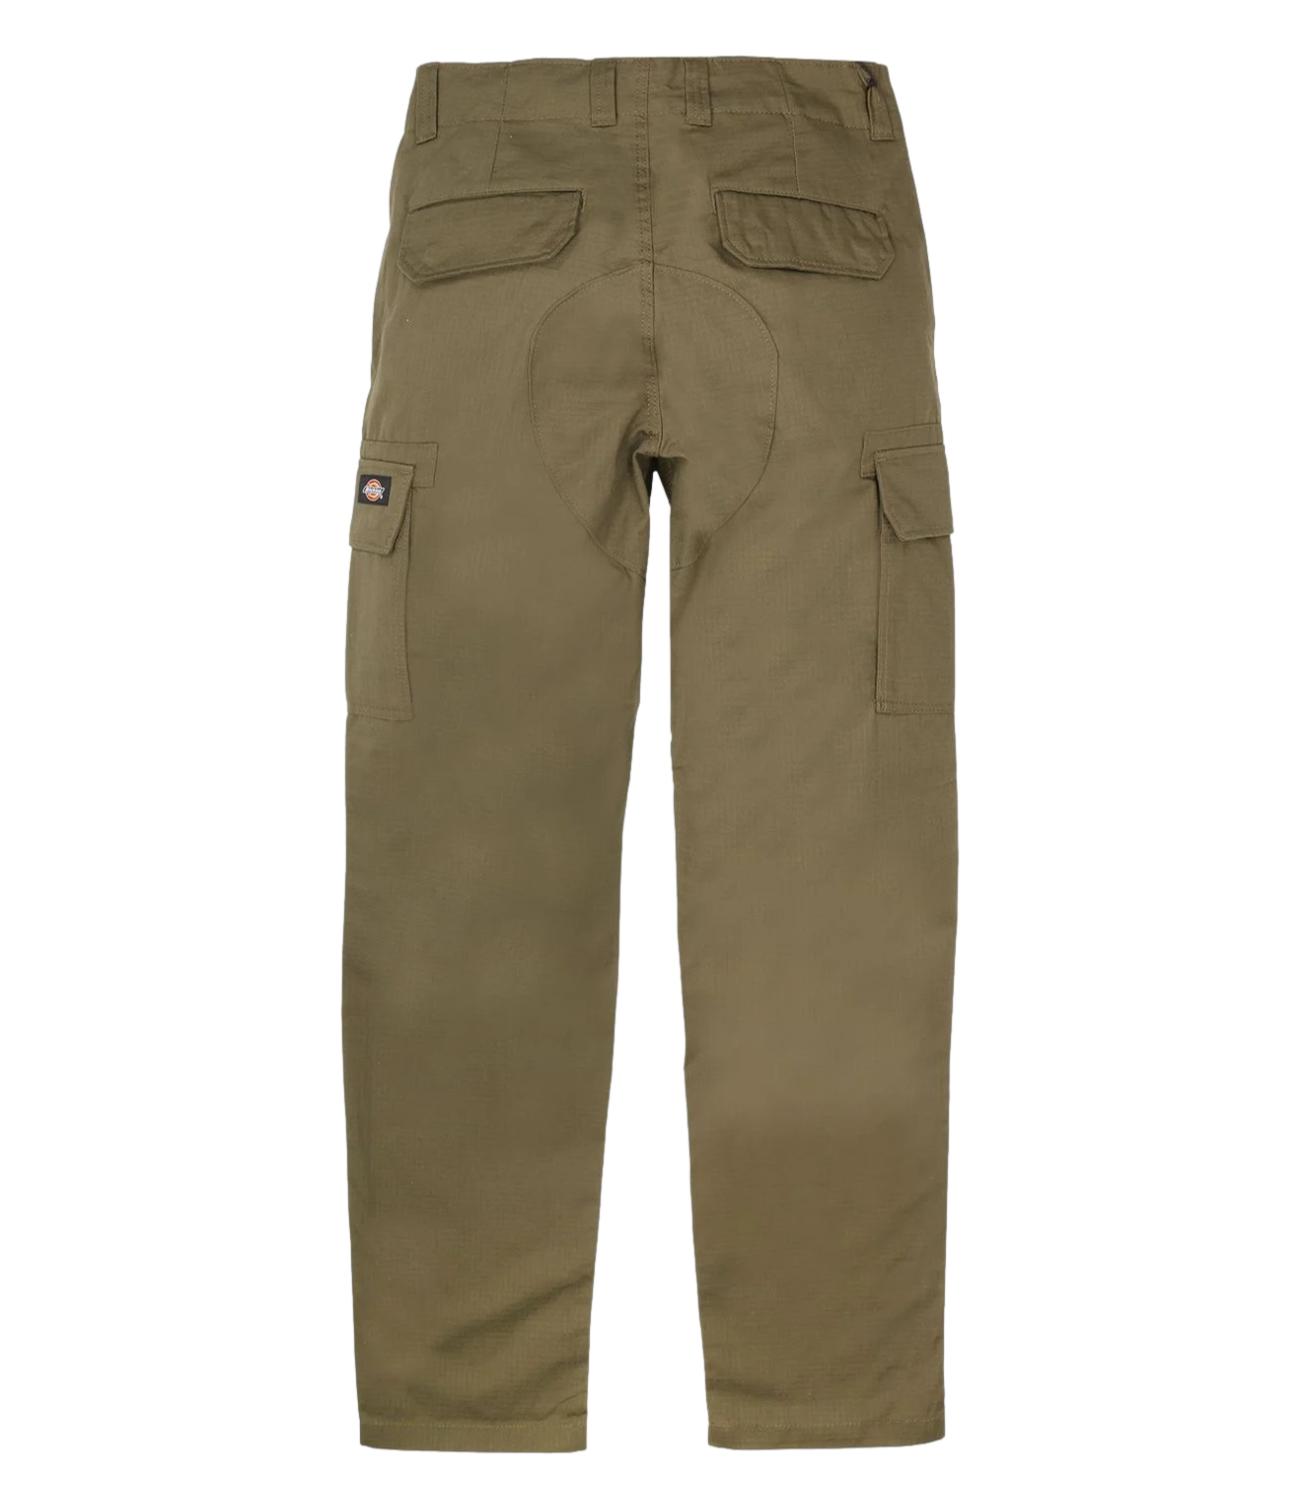 Mud green cargo trousers for men with large pockets